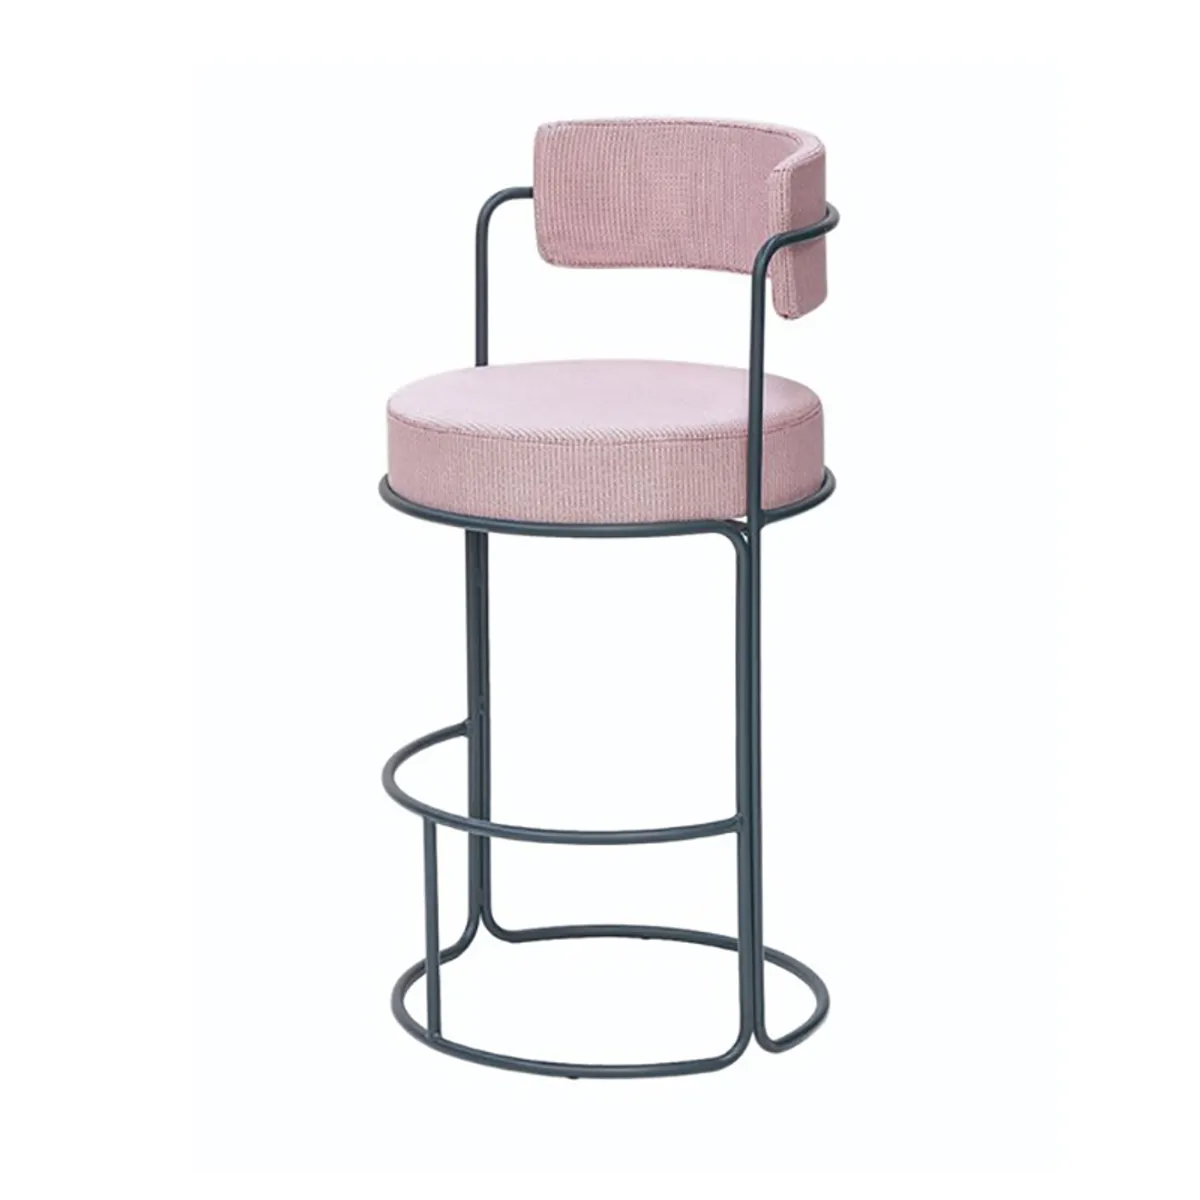 Miami Outdoor Stool With Metal Frame Circular Shape And Pink Upholstery For Trendy Hotels And Relaxed Bars Inside Out Contracts